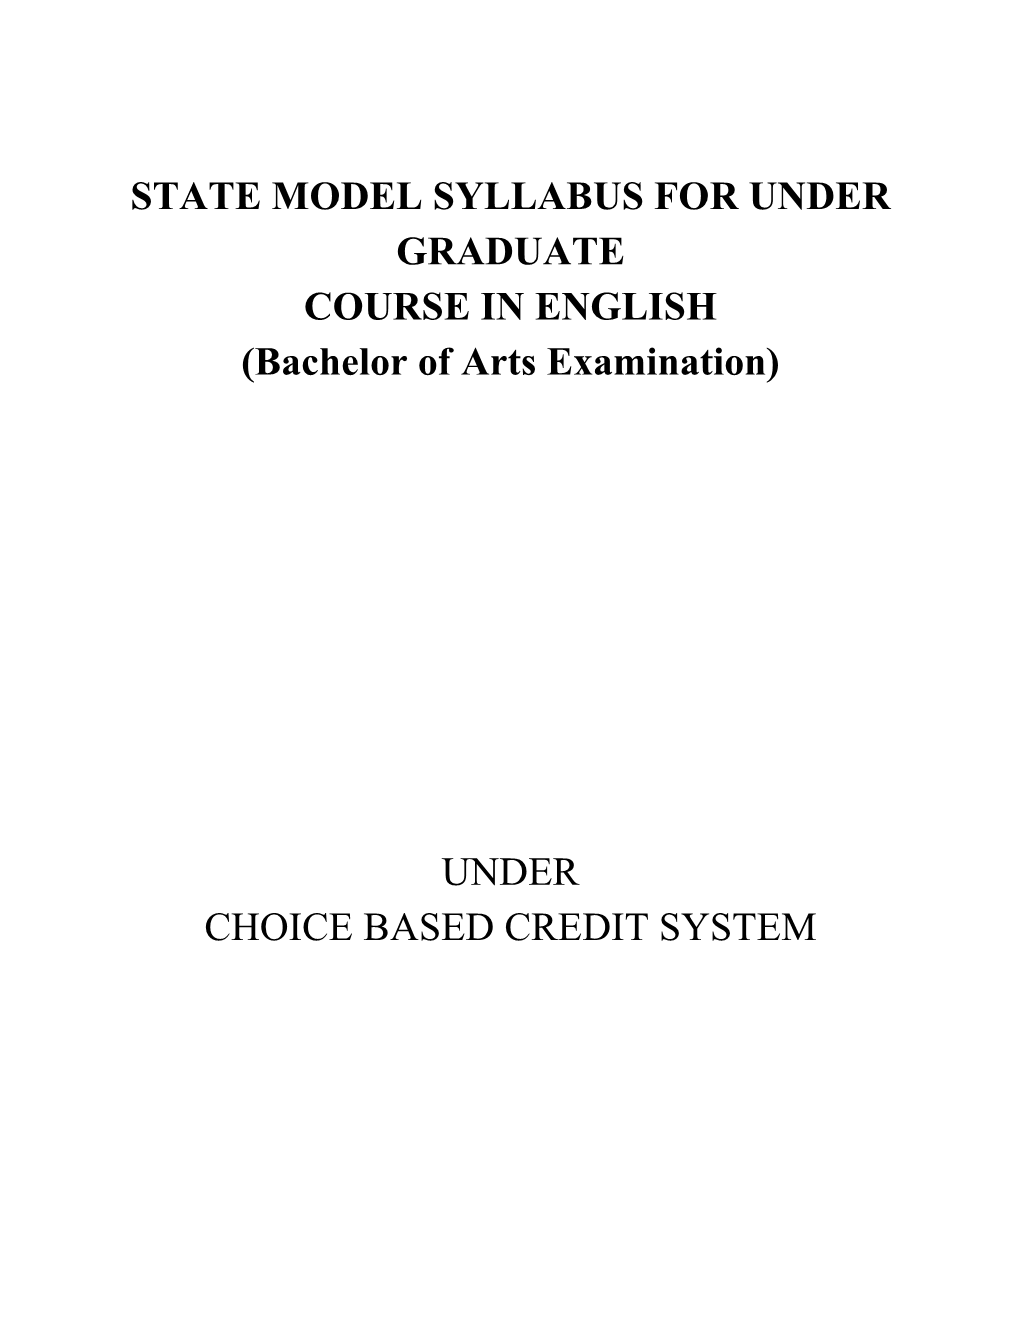 STATE MODEL SYLLABUS for UNDER GRADUATE COURSE in ENGLISH (Bachelor of Arts Examination)